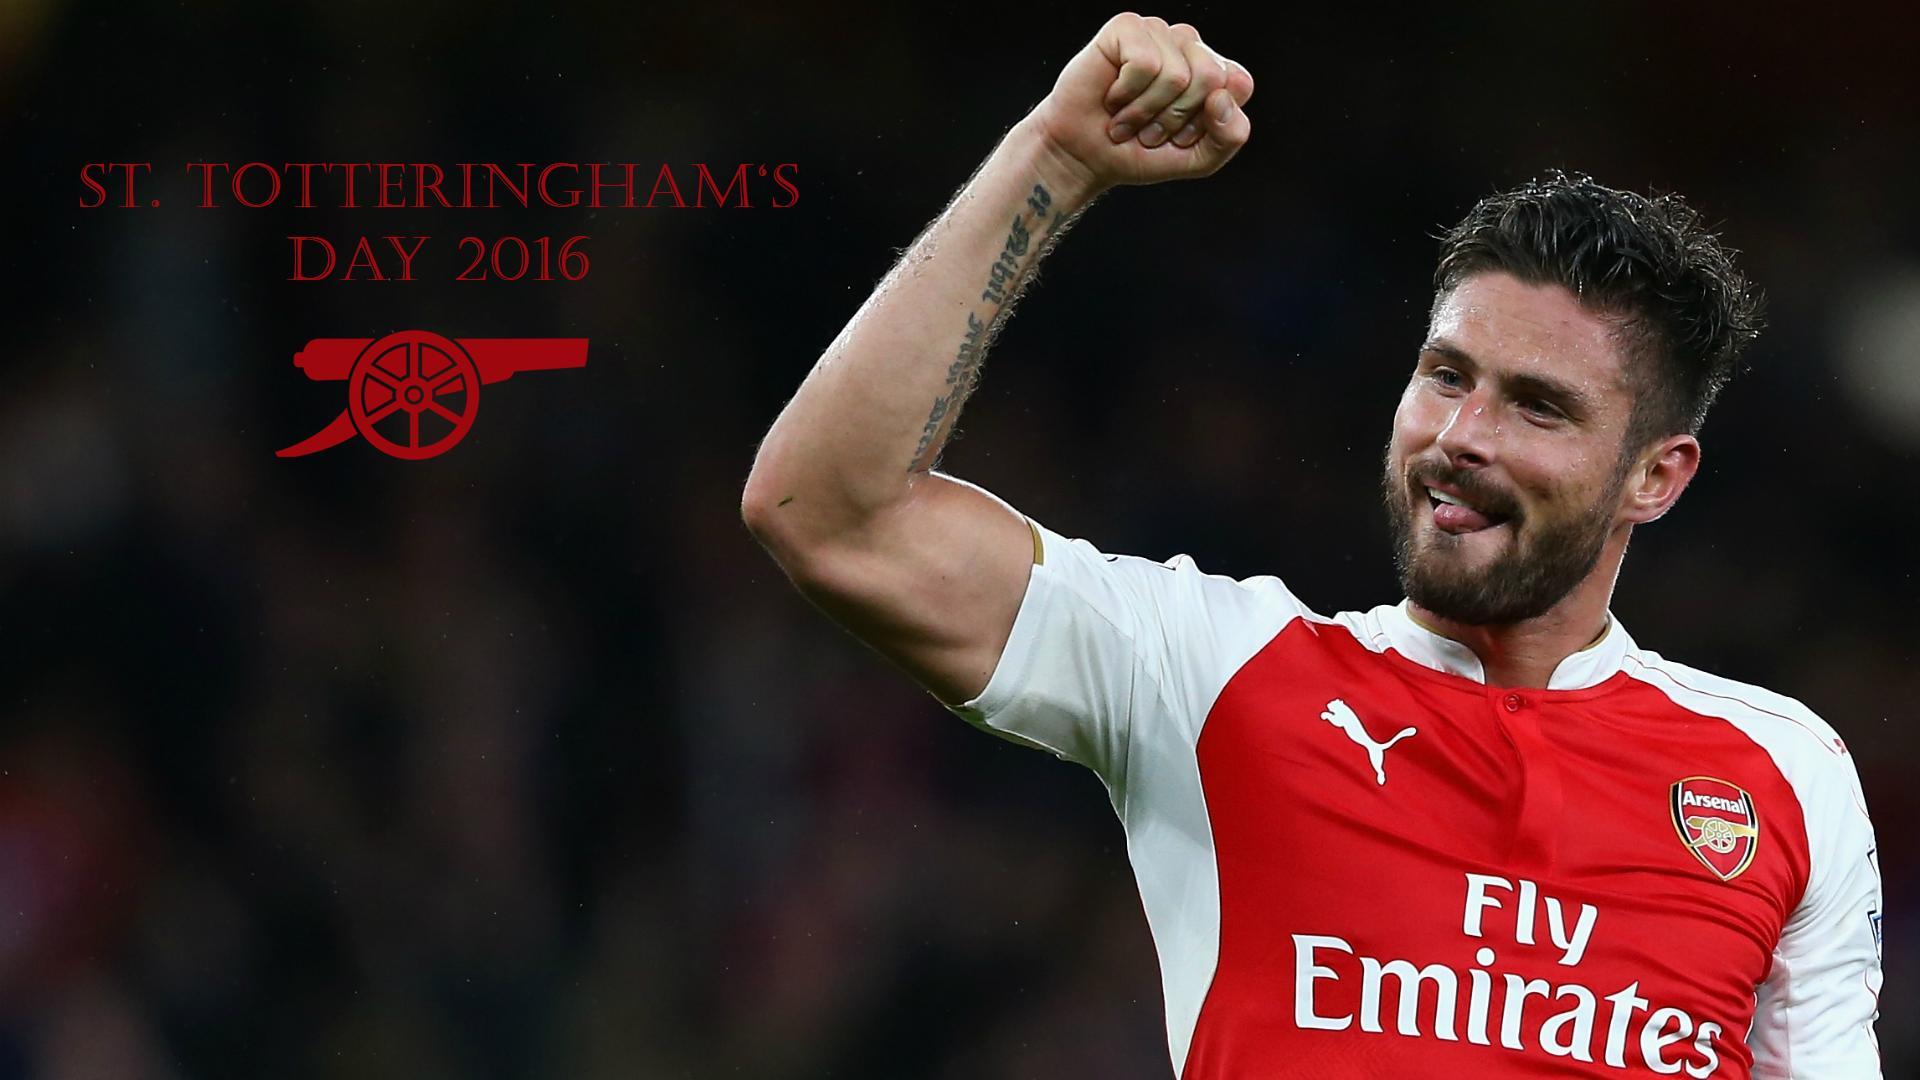 Giroud St. Totteringham's Day wallpaper contribution to